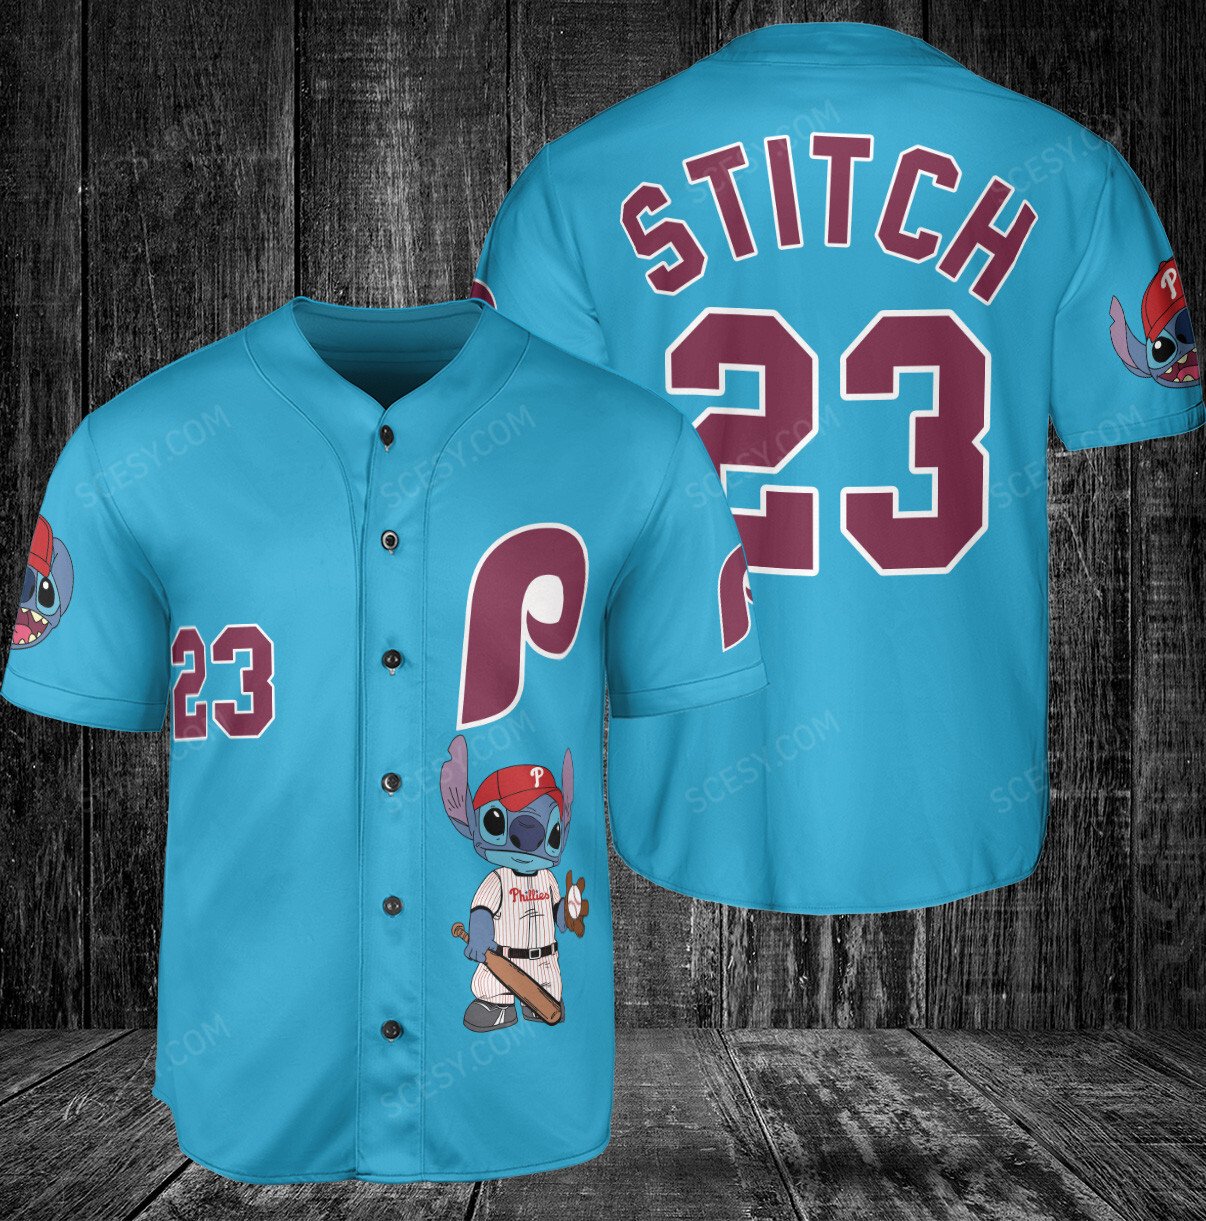 where to buy a phillies jersey